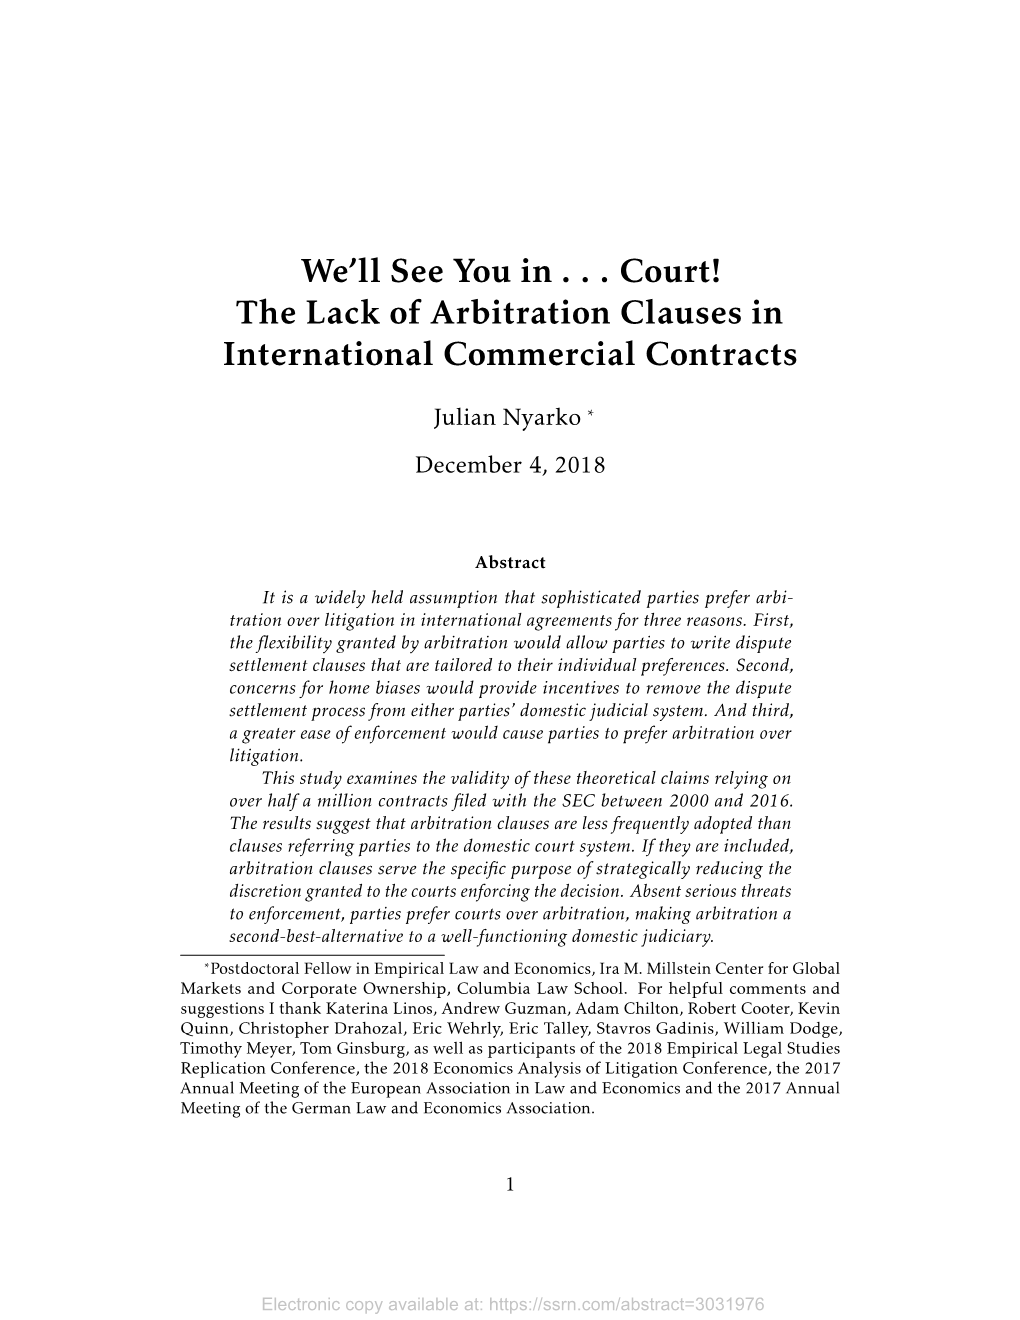 The Lack of Arbitration Clauses in International Commercial Contracts